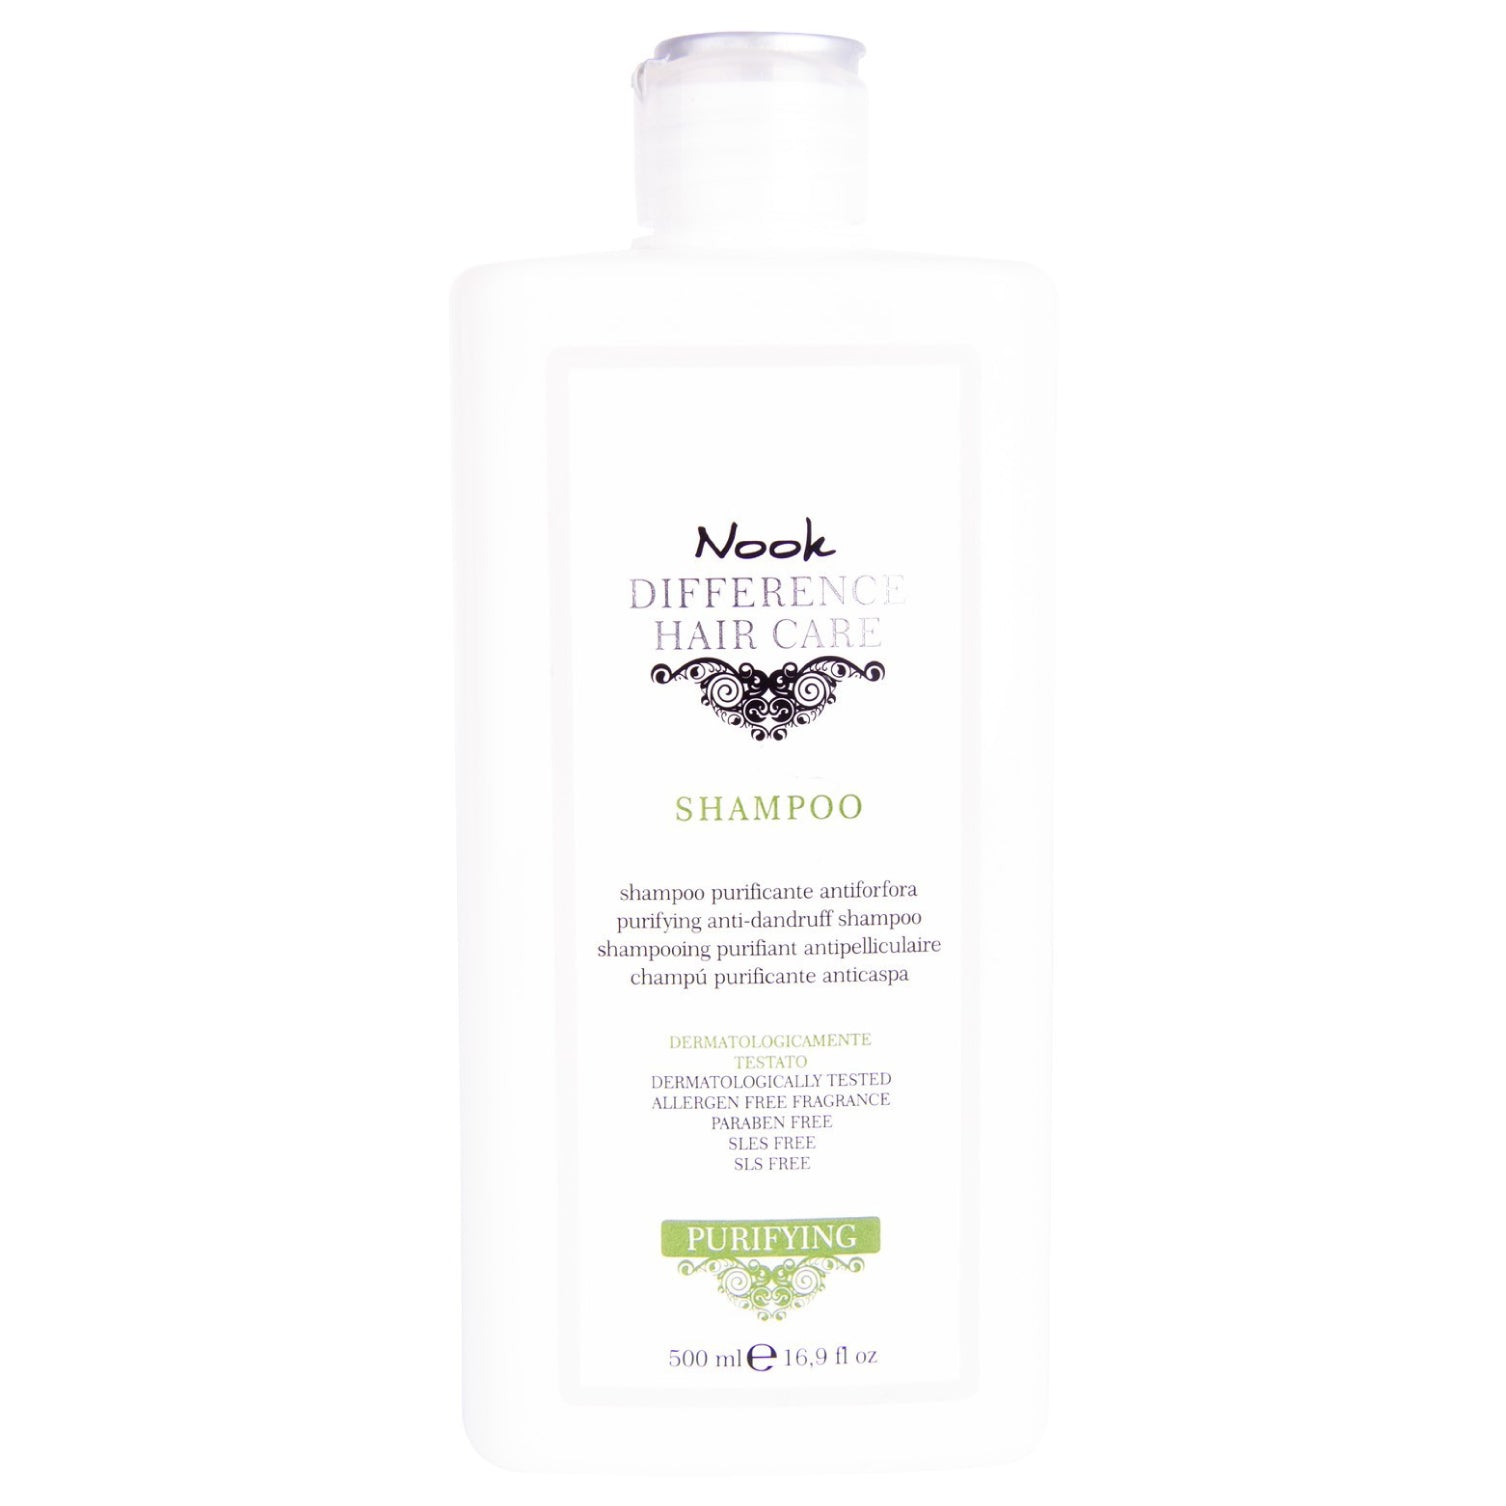 Nook Difference Hair Care Shampoo Purificante 500 ml